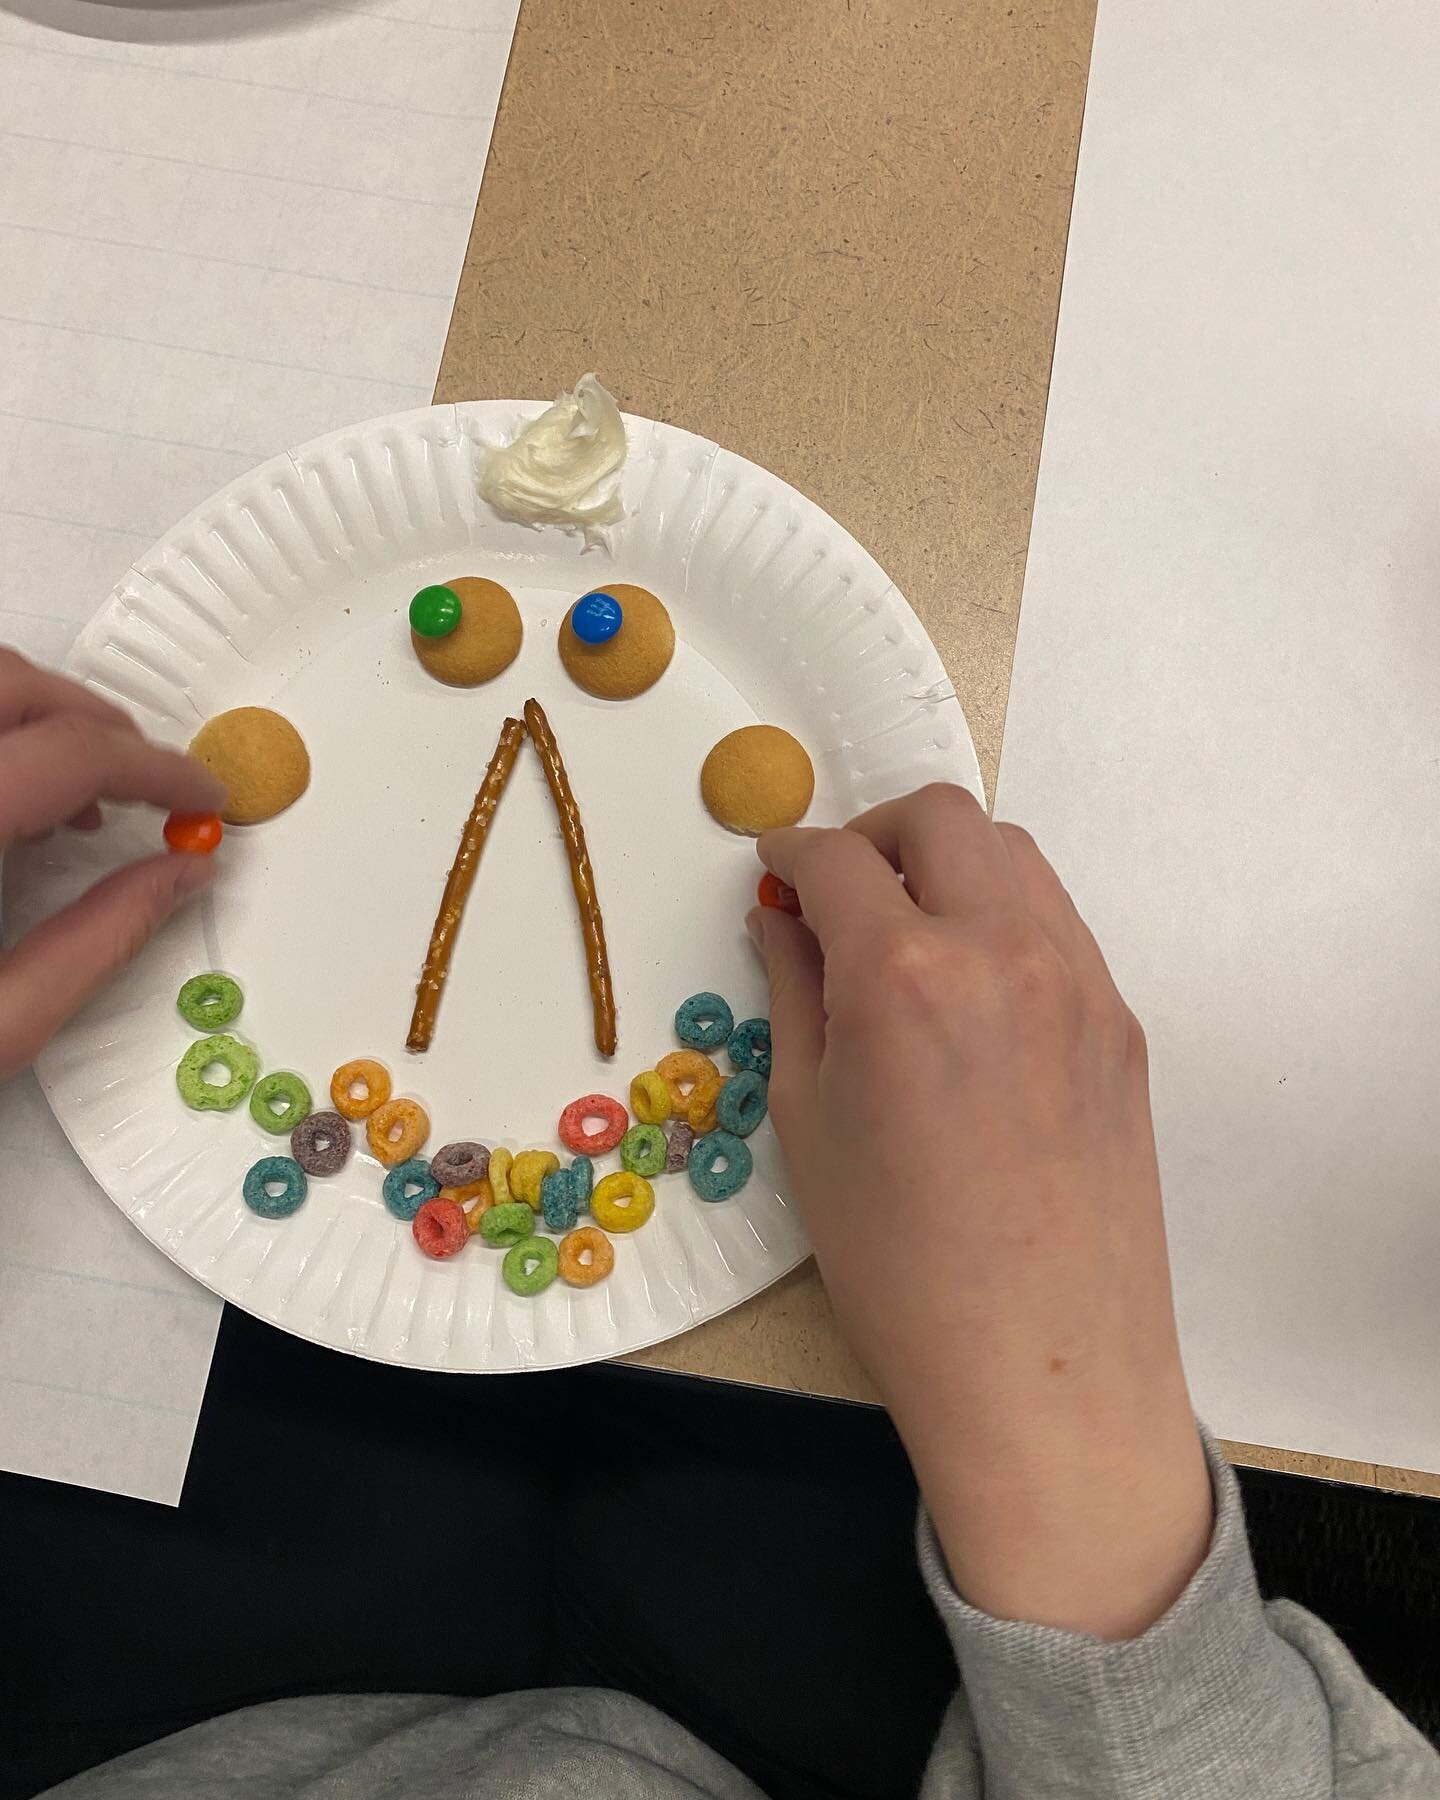 TASTE THE JOY 🥳🍬🍭 A fun way to welcome Hodesh Adar through edible happy faces competition! I&rsquo;d say they played well 😂🤩 We all need a little bit more joy these days and this activity was the remedy. We held a moment of grief for the current